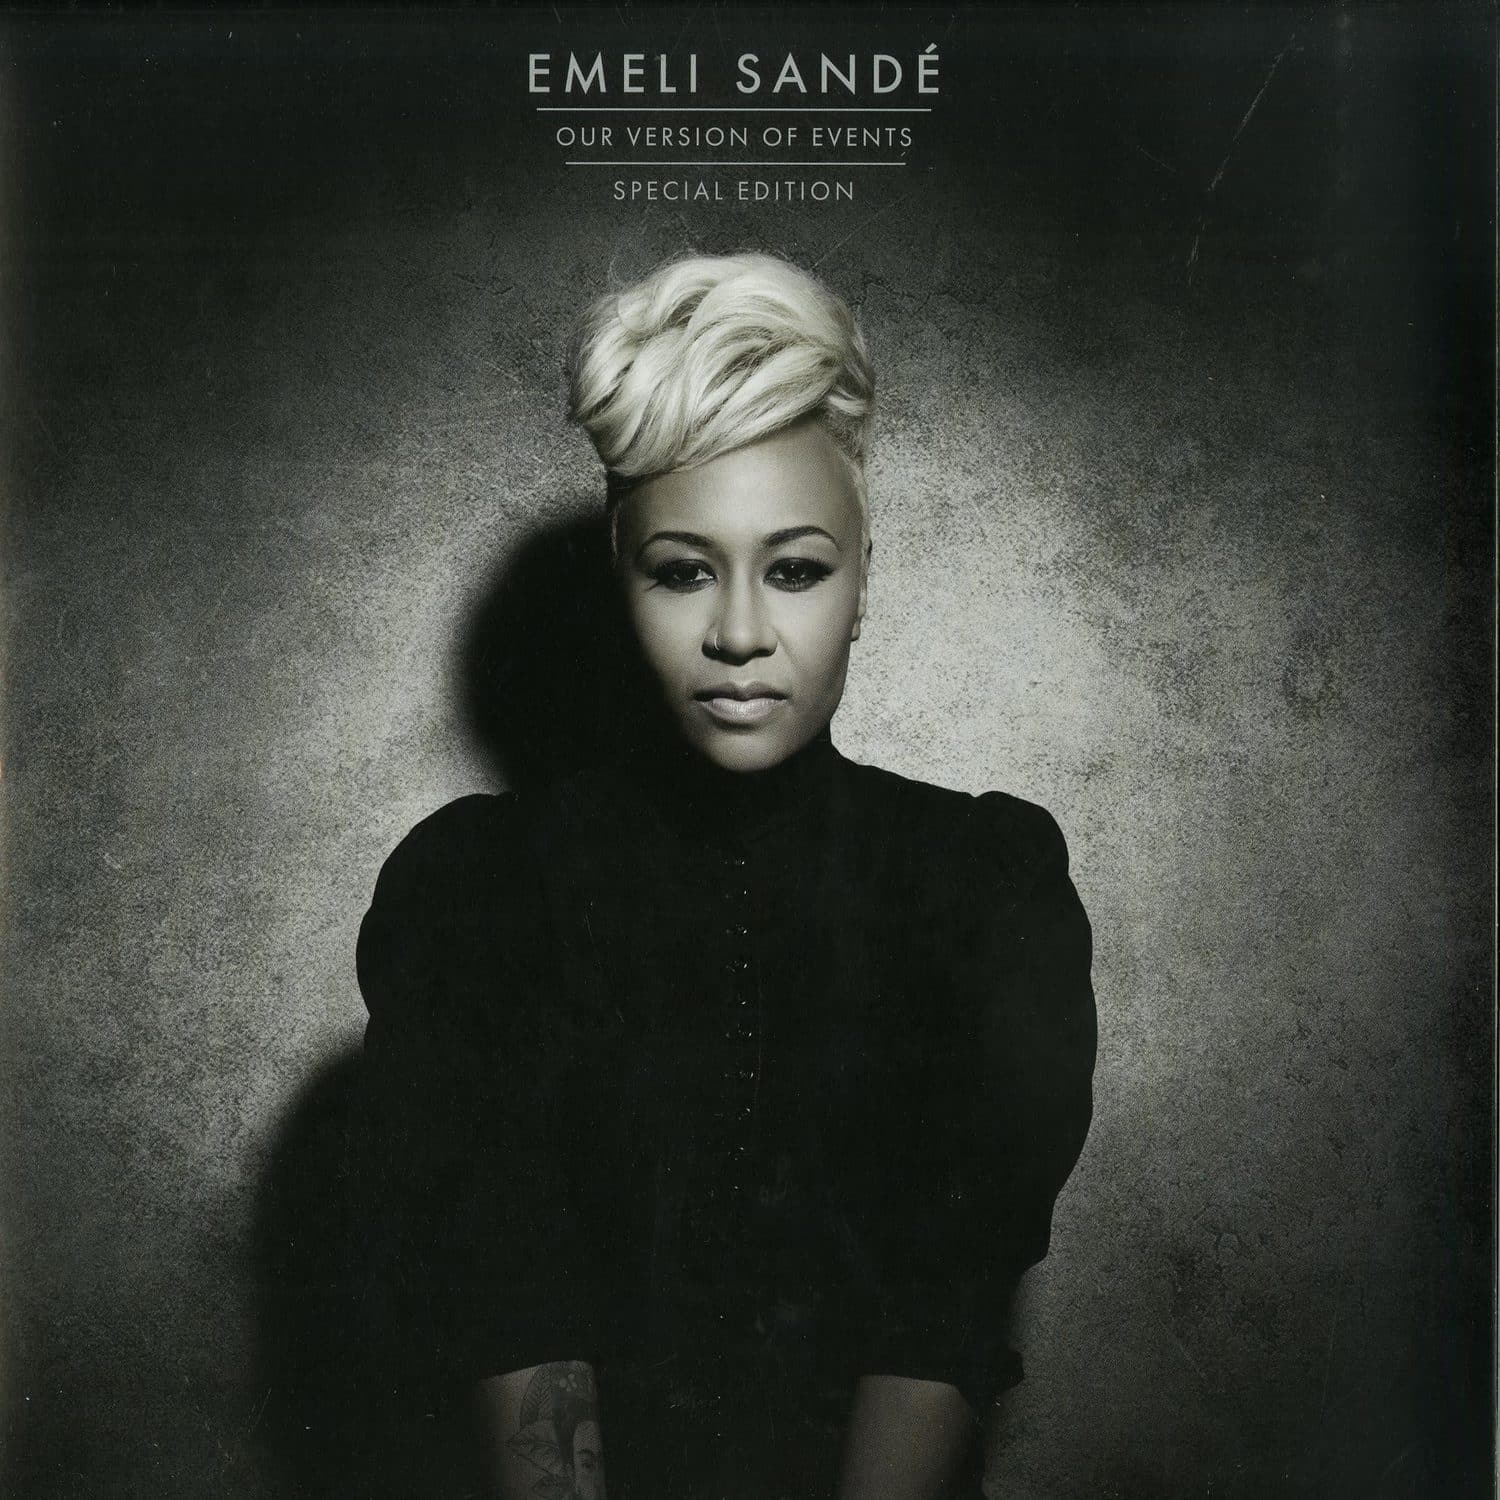 Emeli Sande - OUR VERSION OF EVENTS - SPECIAL EDITION 